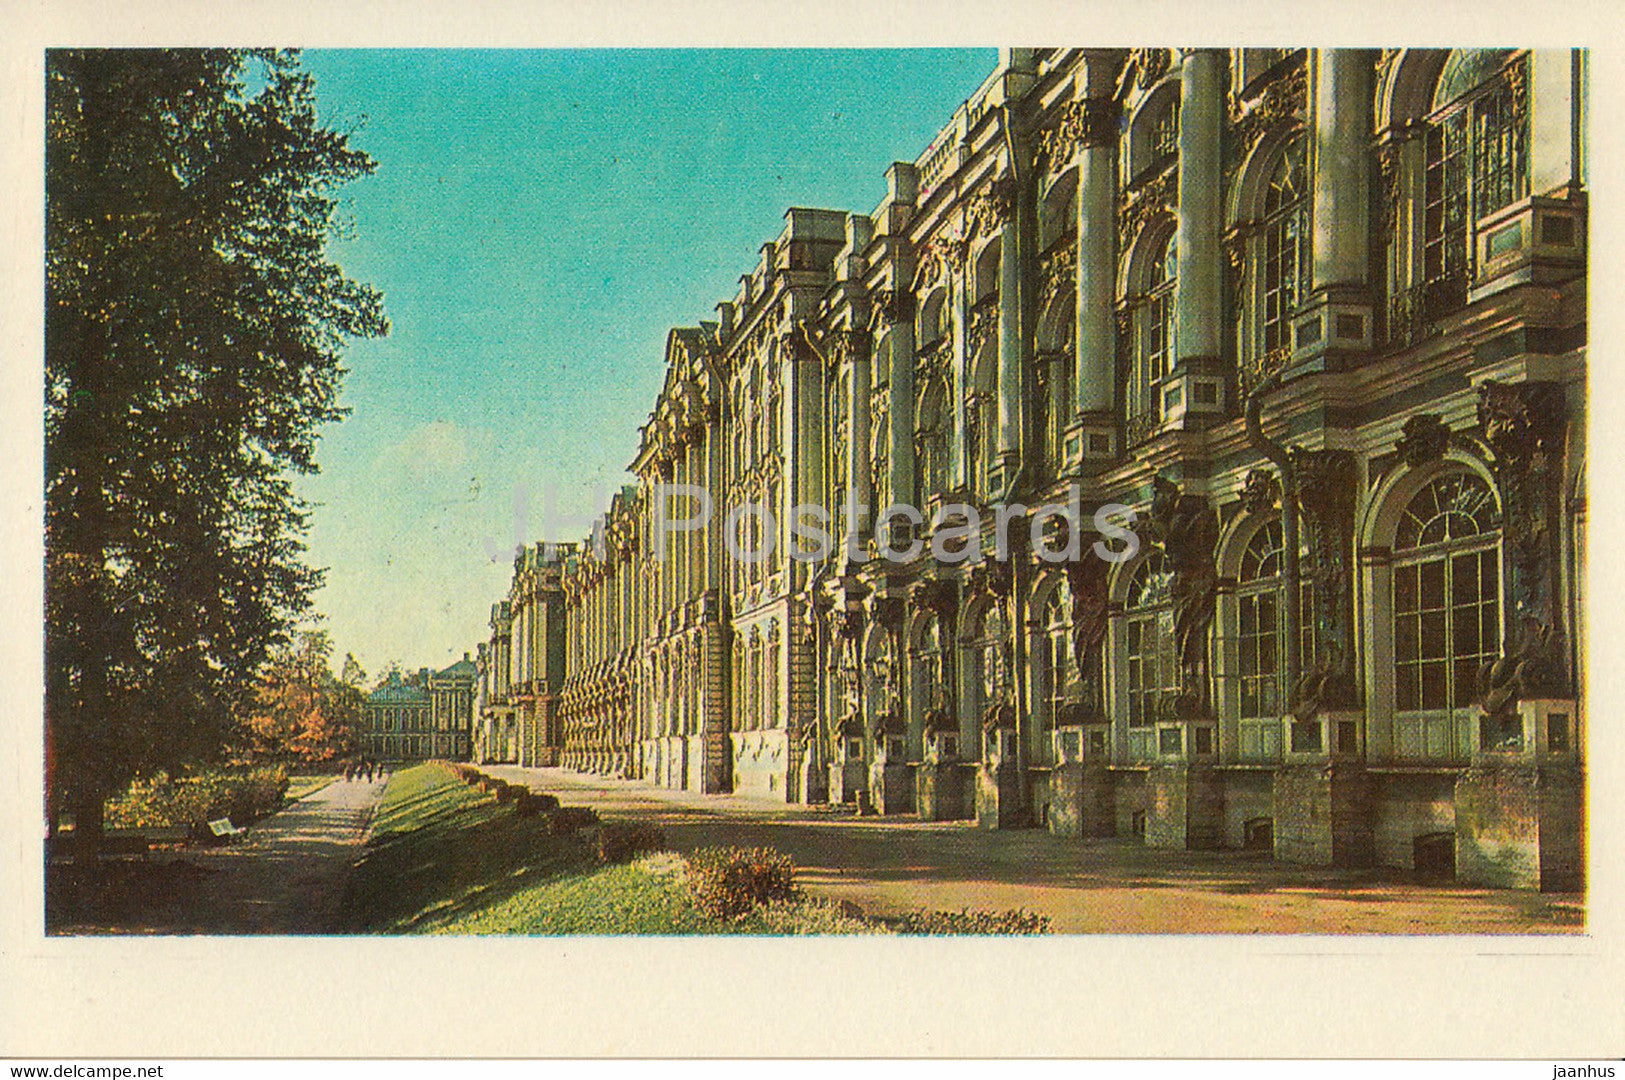 Town of Pushkin - Great (Yekaterinsky) Palace - 1971 - Russia USSR - unused - JH Postcards